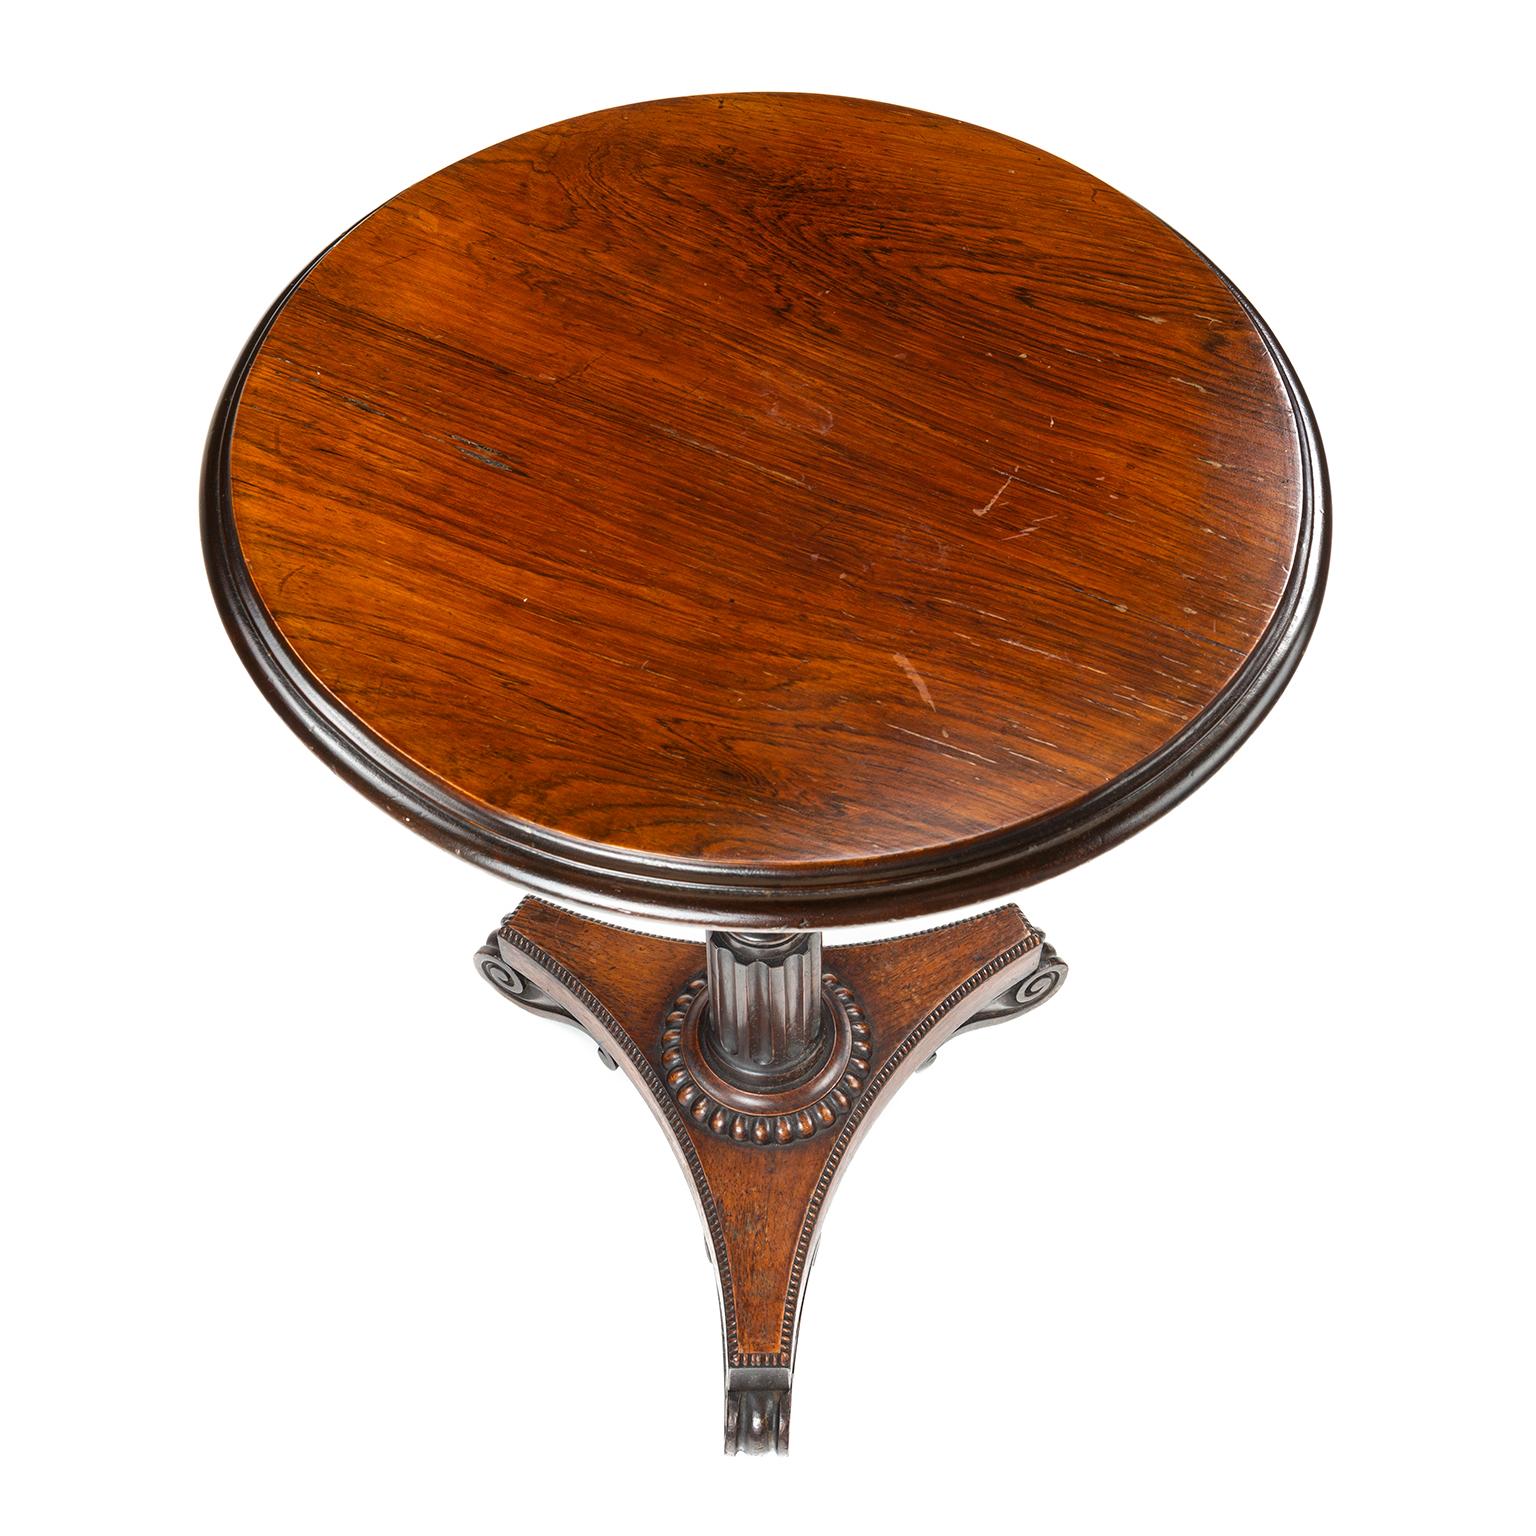 Regency Accredited to Gillows a William IV Rosewood Wine Table